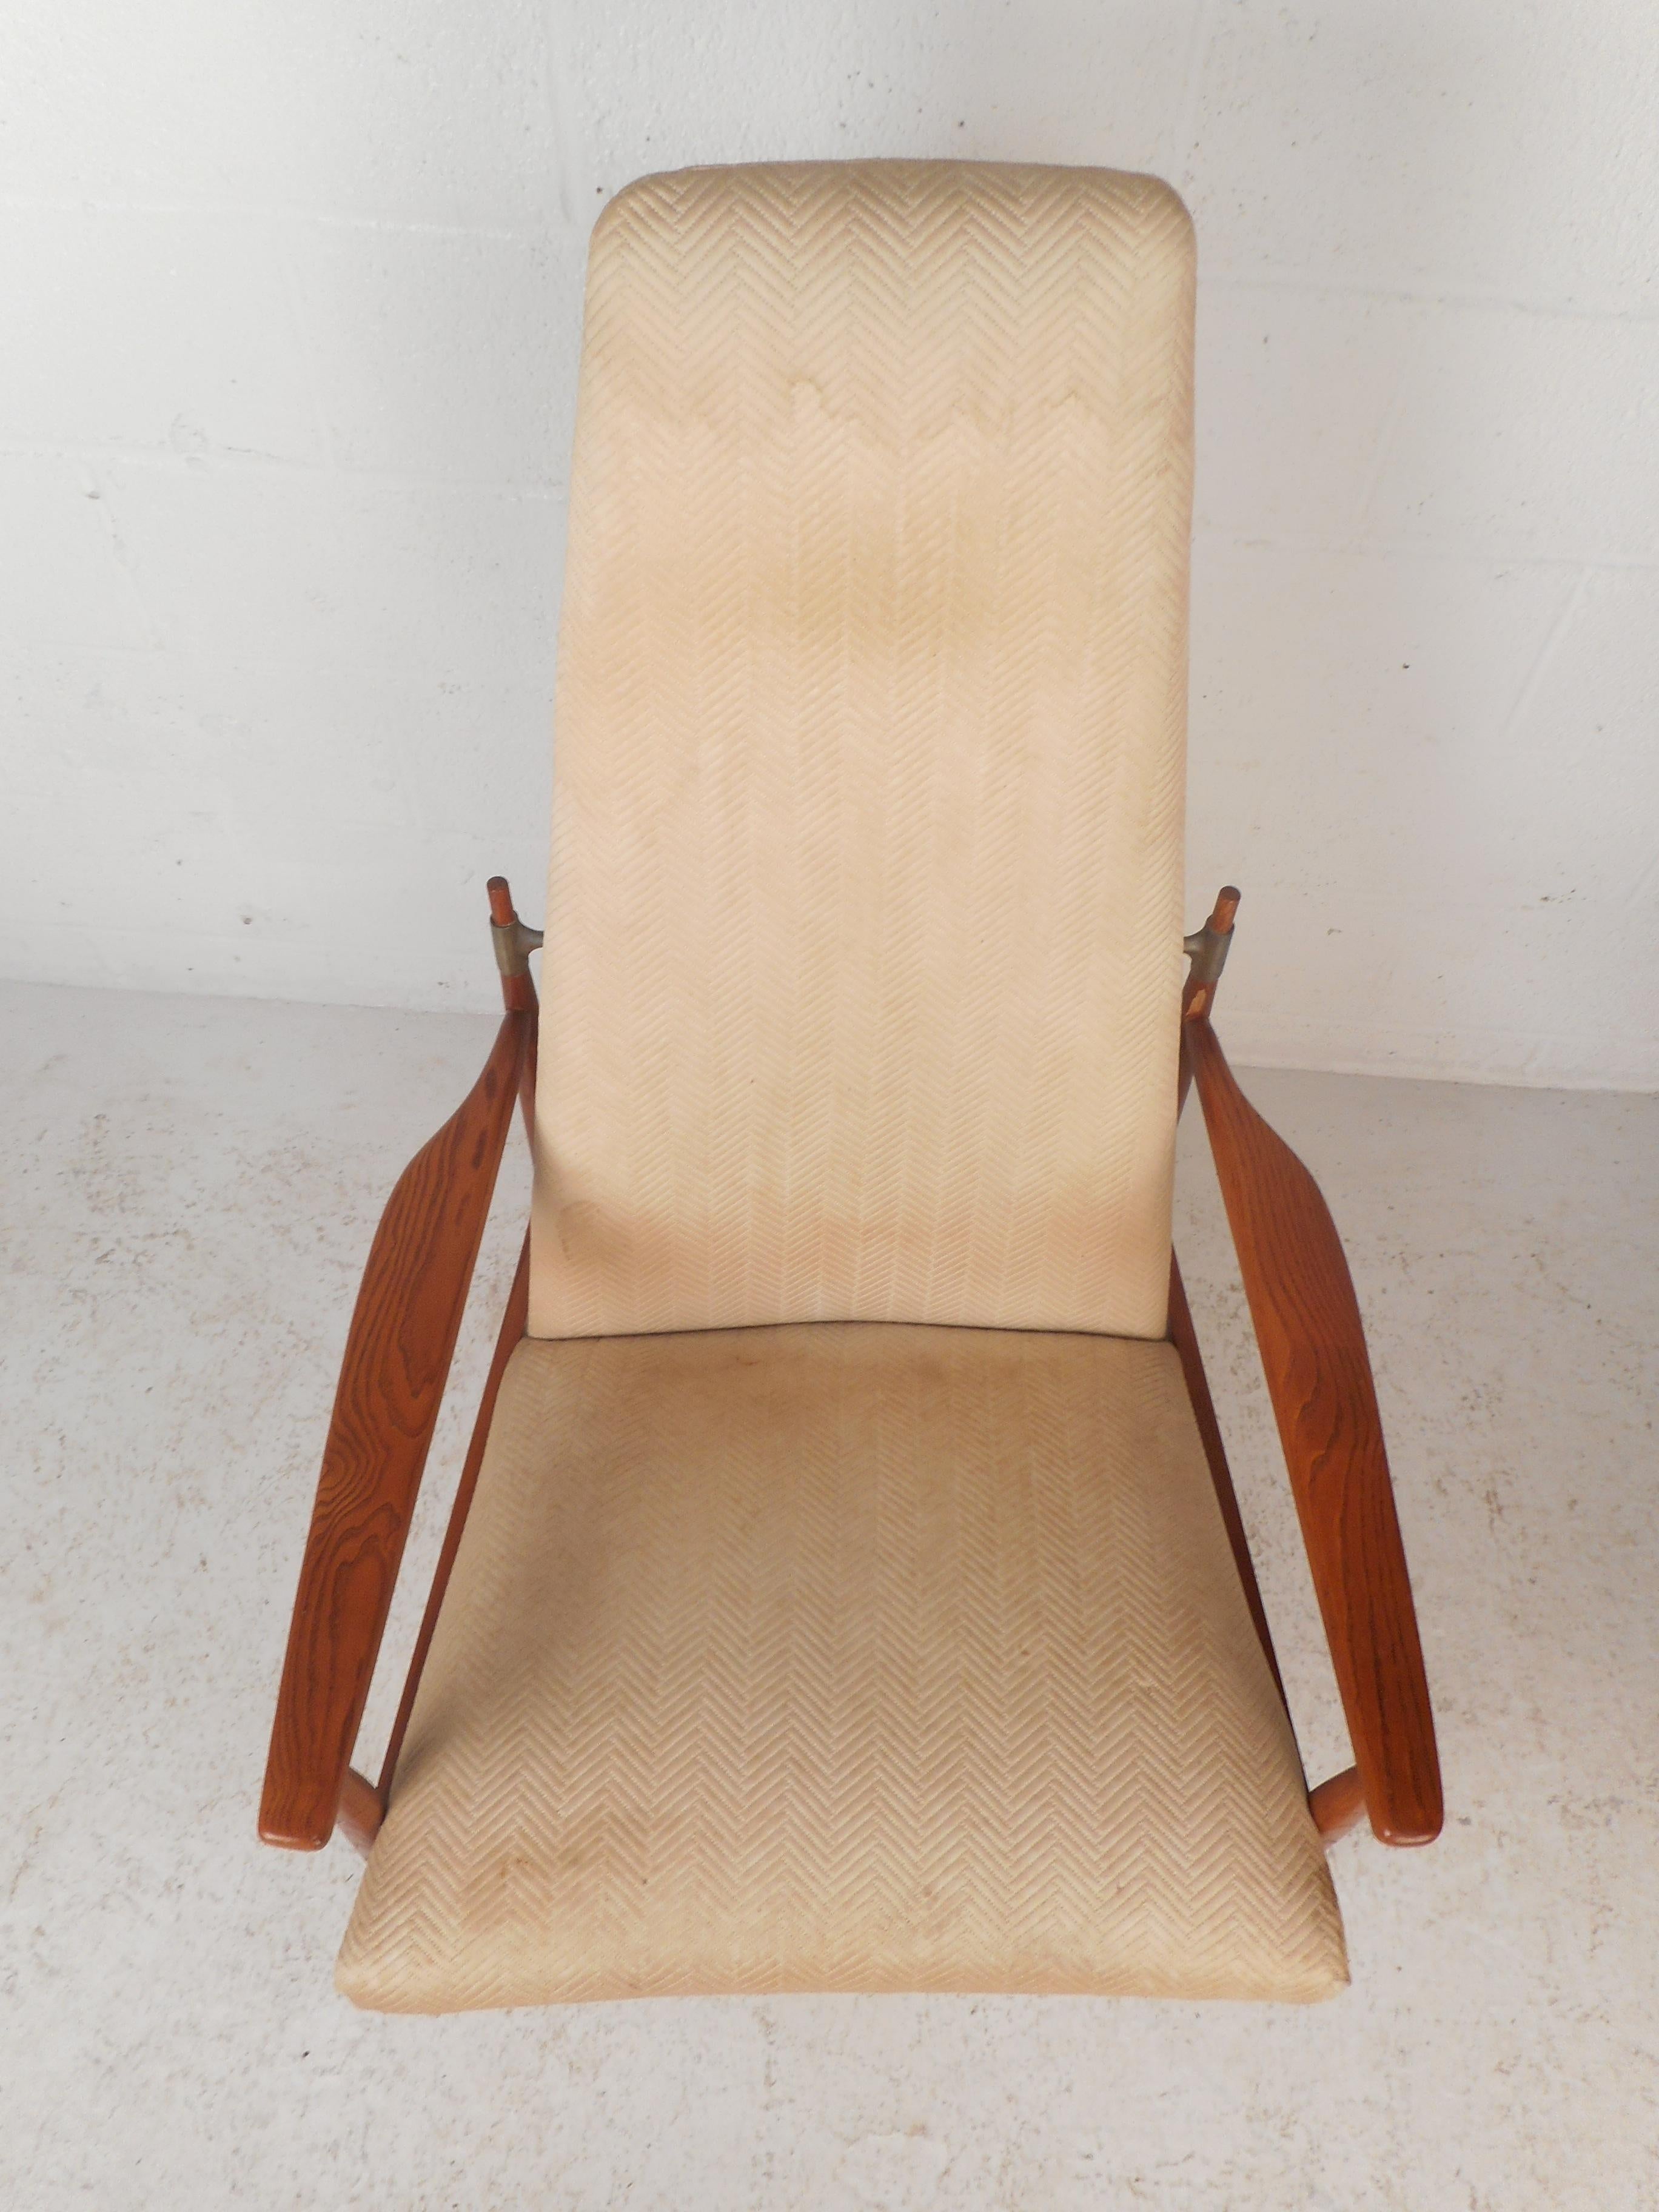 Late 20th Century Danish Jens Quistgaard Style Peter Hvidt High Back Lounge Chair For Sale